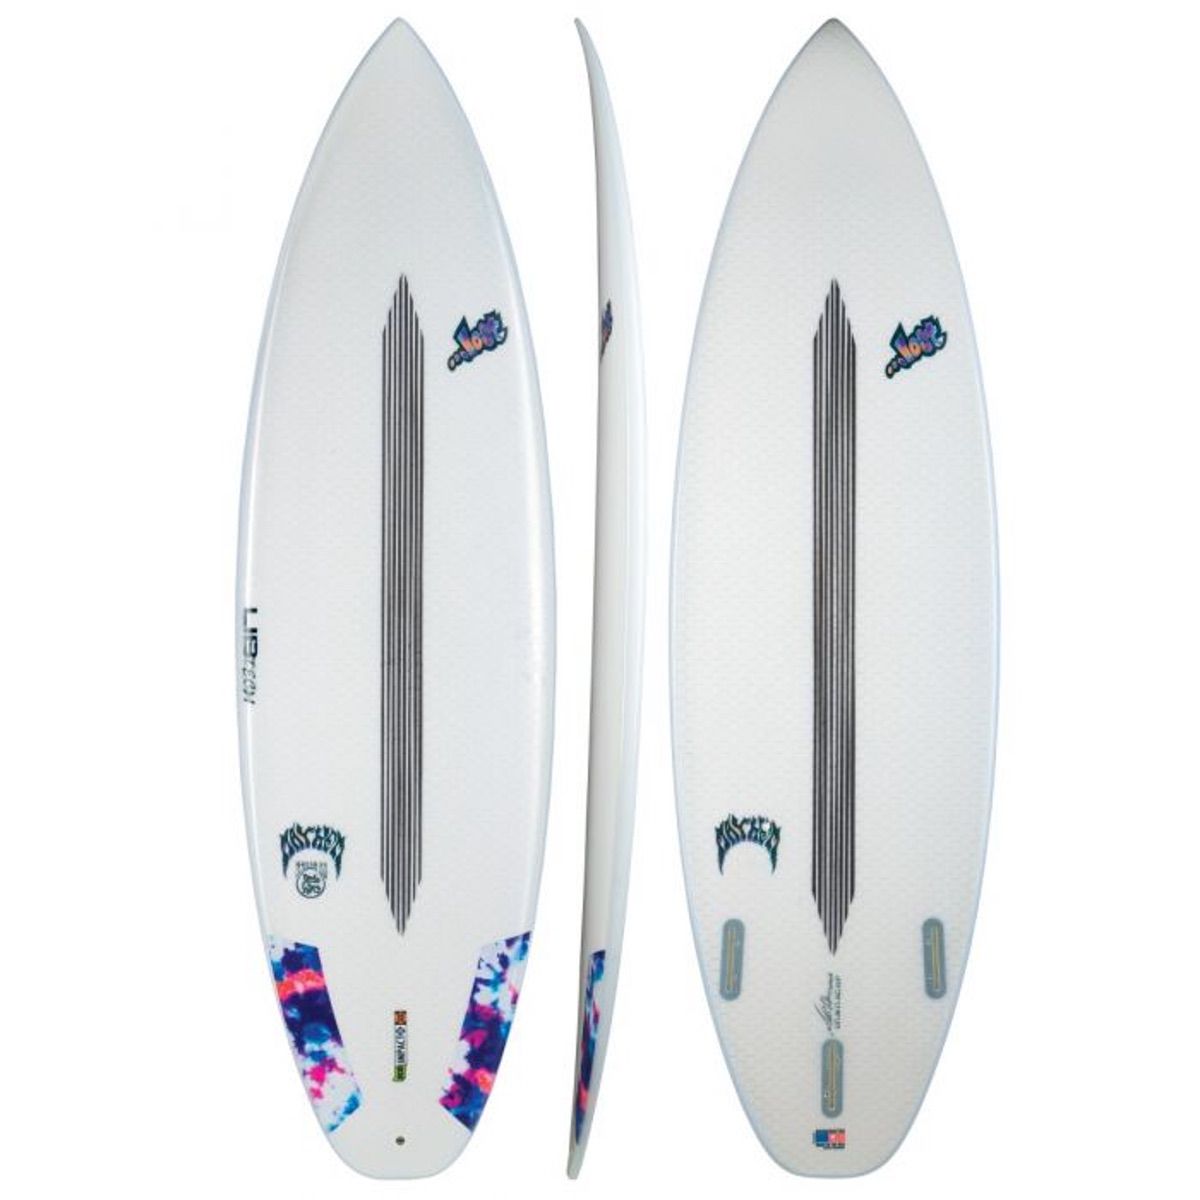 Libtech surfboards environMENTALLY friendly composite surf 